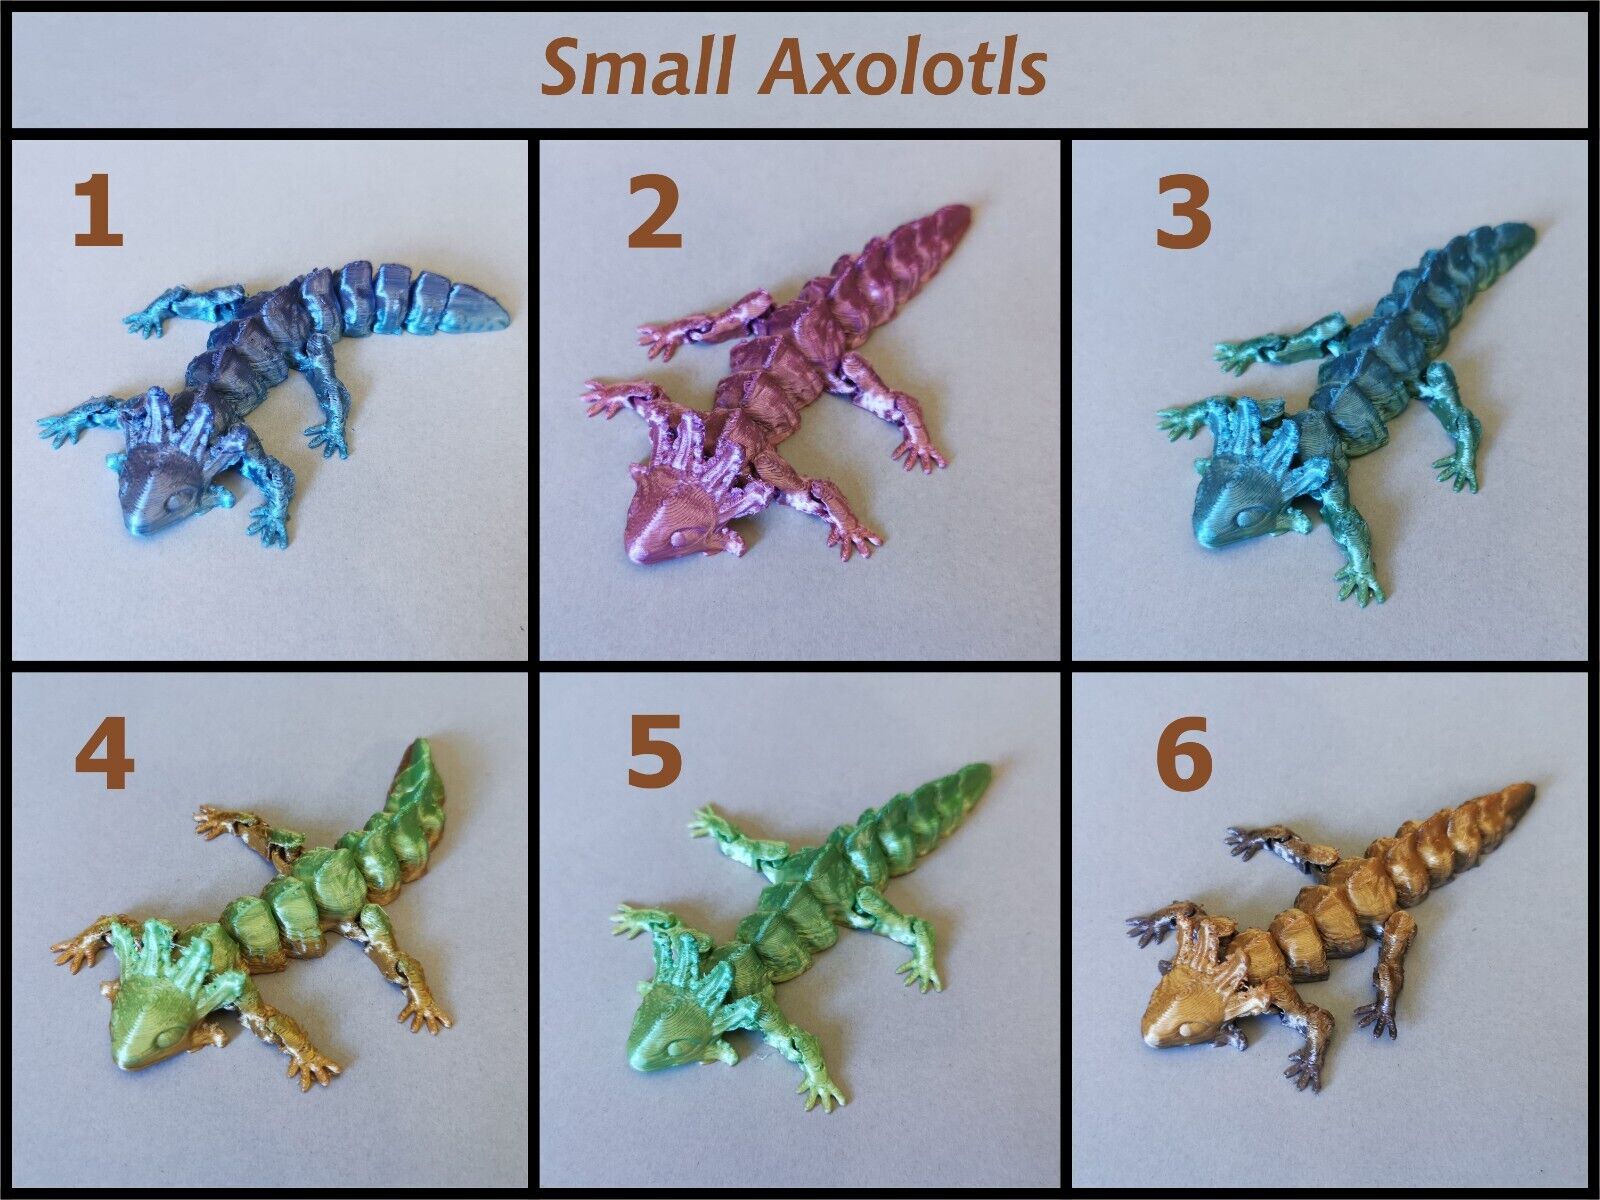 Axolotl - Multicoloured - Articulated - Water Dragon - Pick Your Own Xmas gift.